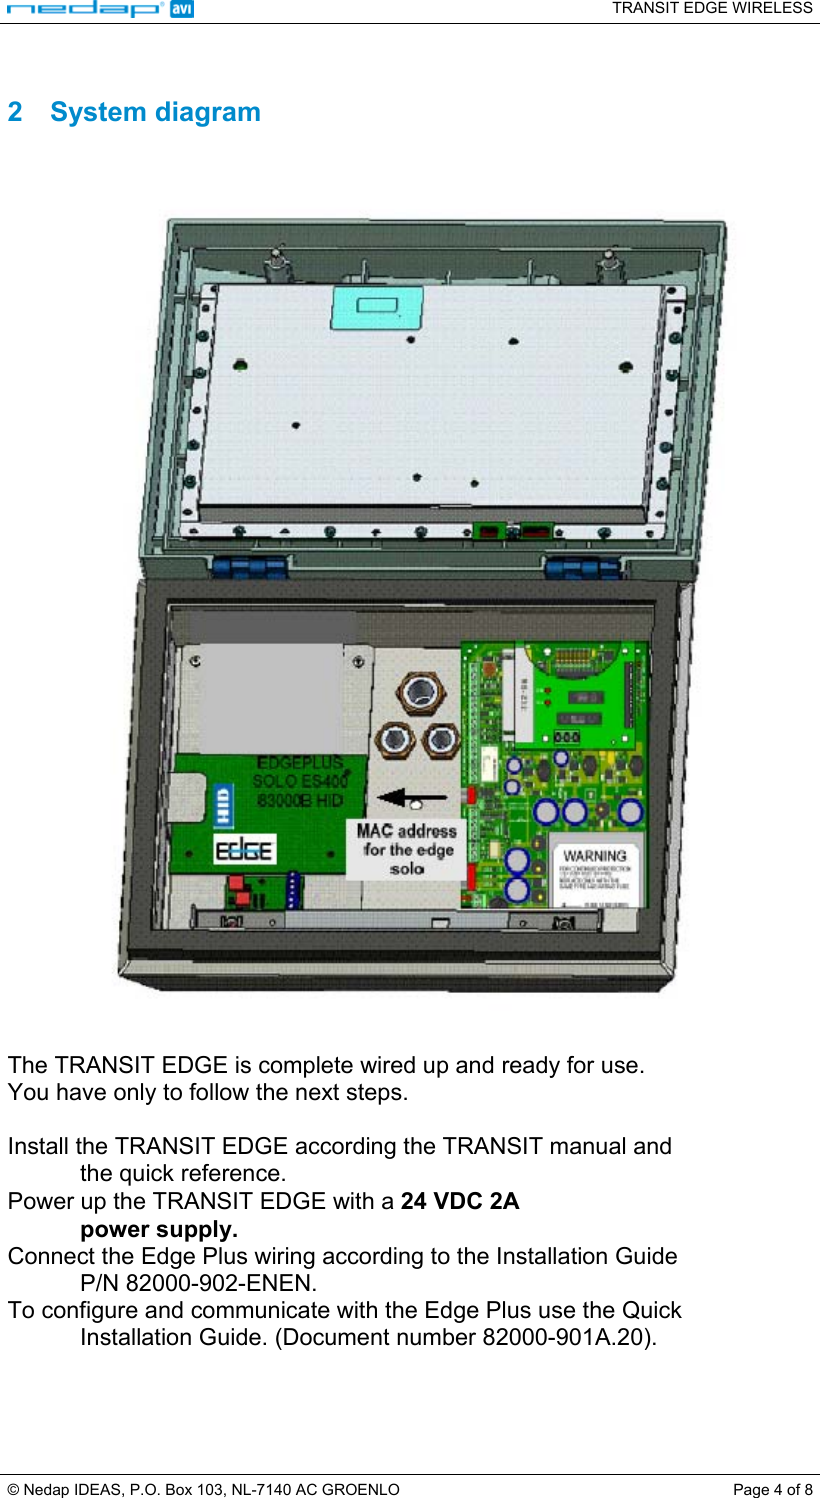   TRANSIT EDGE WIRELESS  © Nedap IDEAS, P.O. Box 103, NL-7140 AC GROENLO  Page 4 of 8  2 System diagram      The TRANSIT EDGE is complete wired up and ready for use. You have only to follow the next steps.  Install the TRANSIT EDGE according the TRANSIT manual and            the quick reference. Power up the TRANSIT EDGE with a 24 VDC 2A            power supply. Connect the Edge Plus wiring according to the Installation Guide            P/N 82000-902-ENEN. To configure and communicate with the Edge Plus use the Quick            Installation Guide. (Document number 82000-901A.20).    